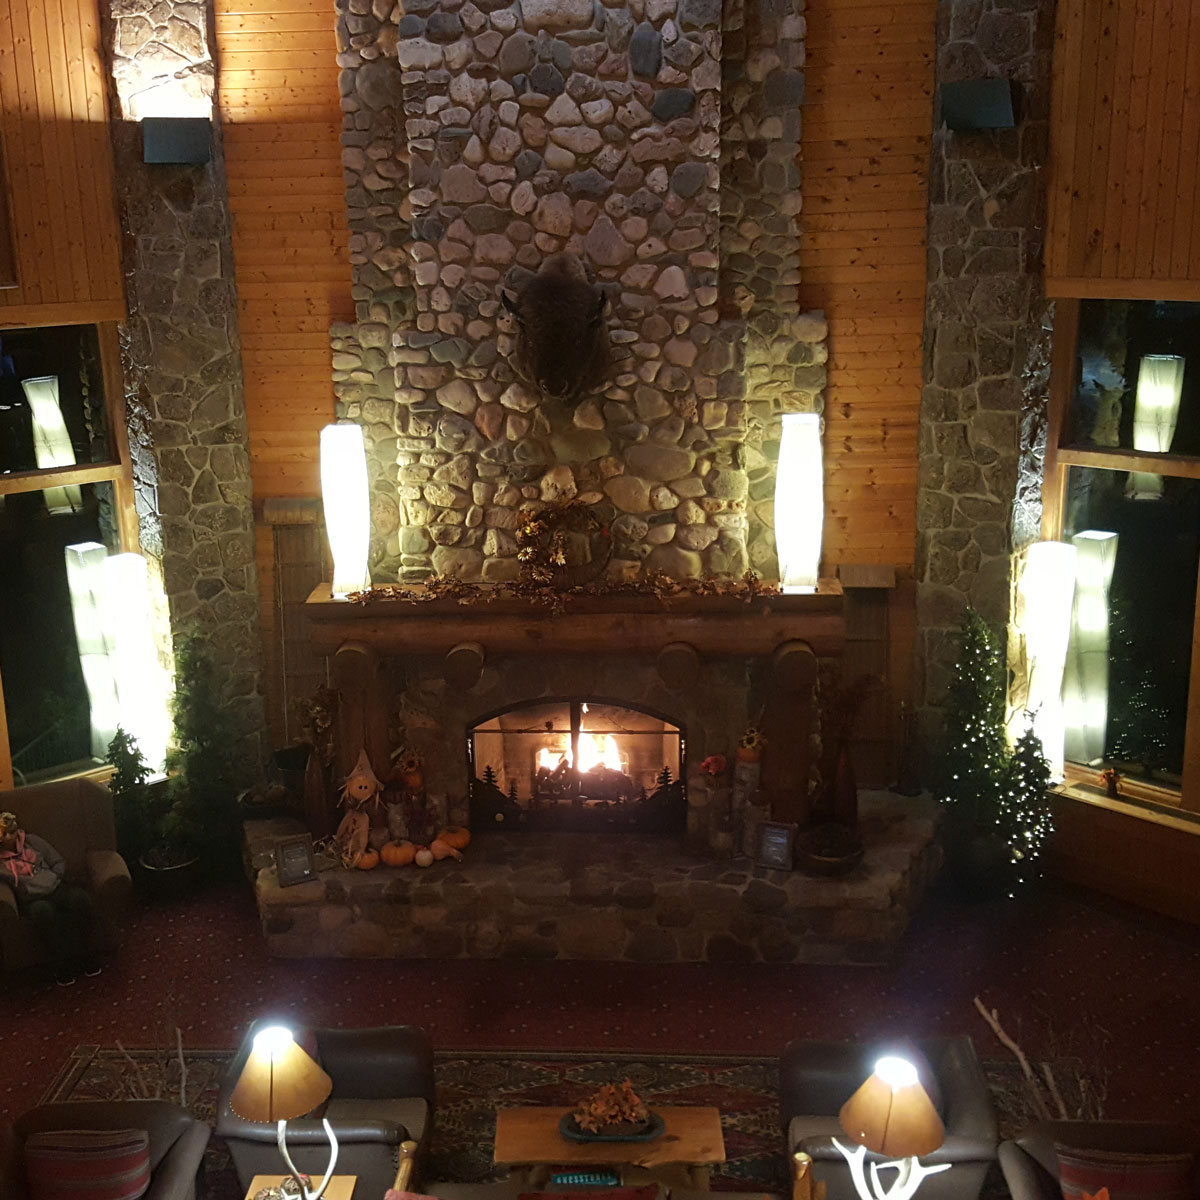 The warmth of a fire blazes from a stone hearth and chimney in a lobby of pine walls trimmed in stone at Spearfish Canyon Lodge on a cool October night. Comfortable leather chairs are lit by lamps made of deer antlers. An Autumn arrangement of pumpkins and scarecrows line the hearth in the warm light of fireplace and lamps.